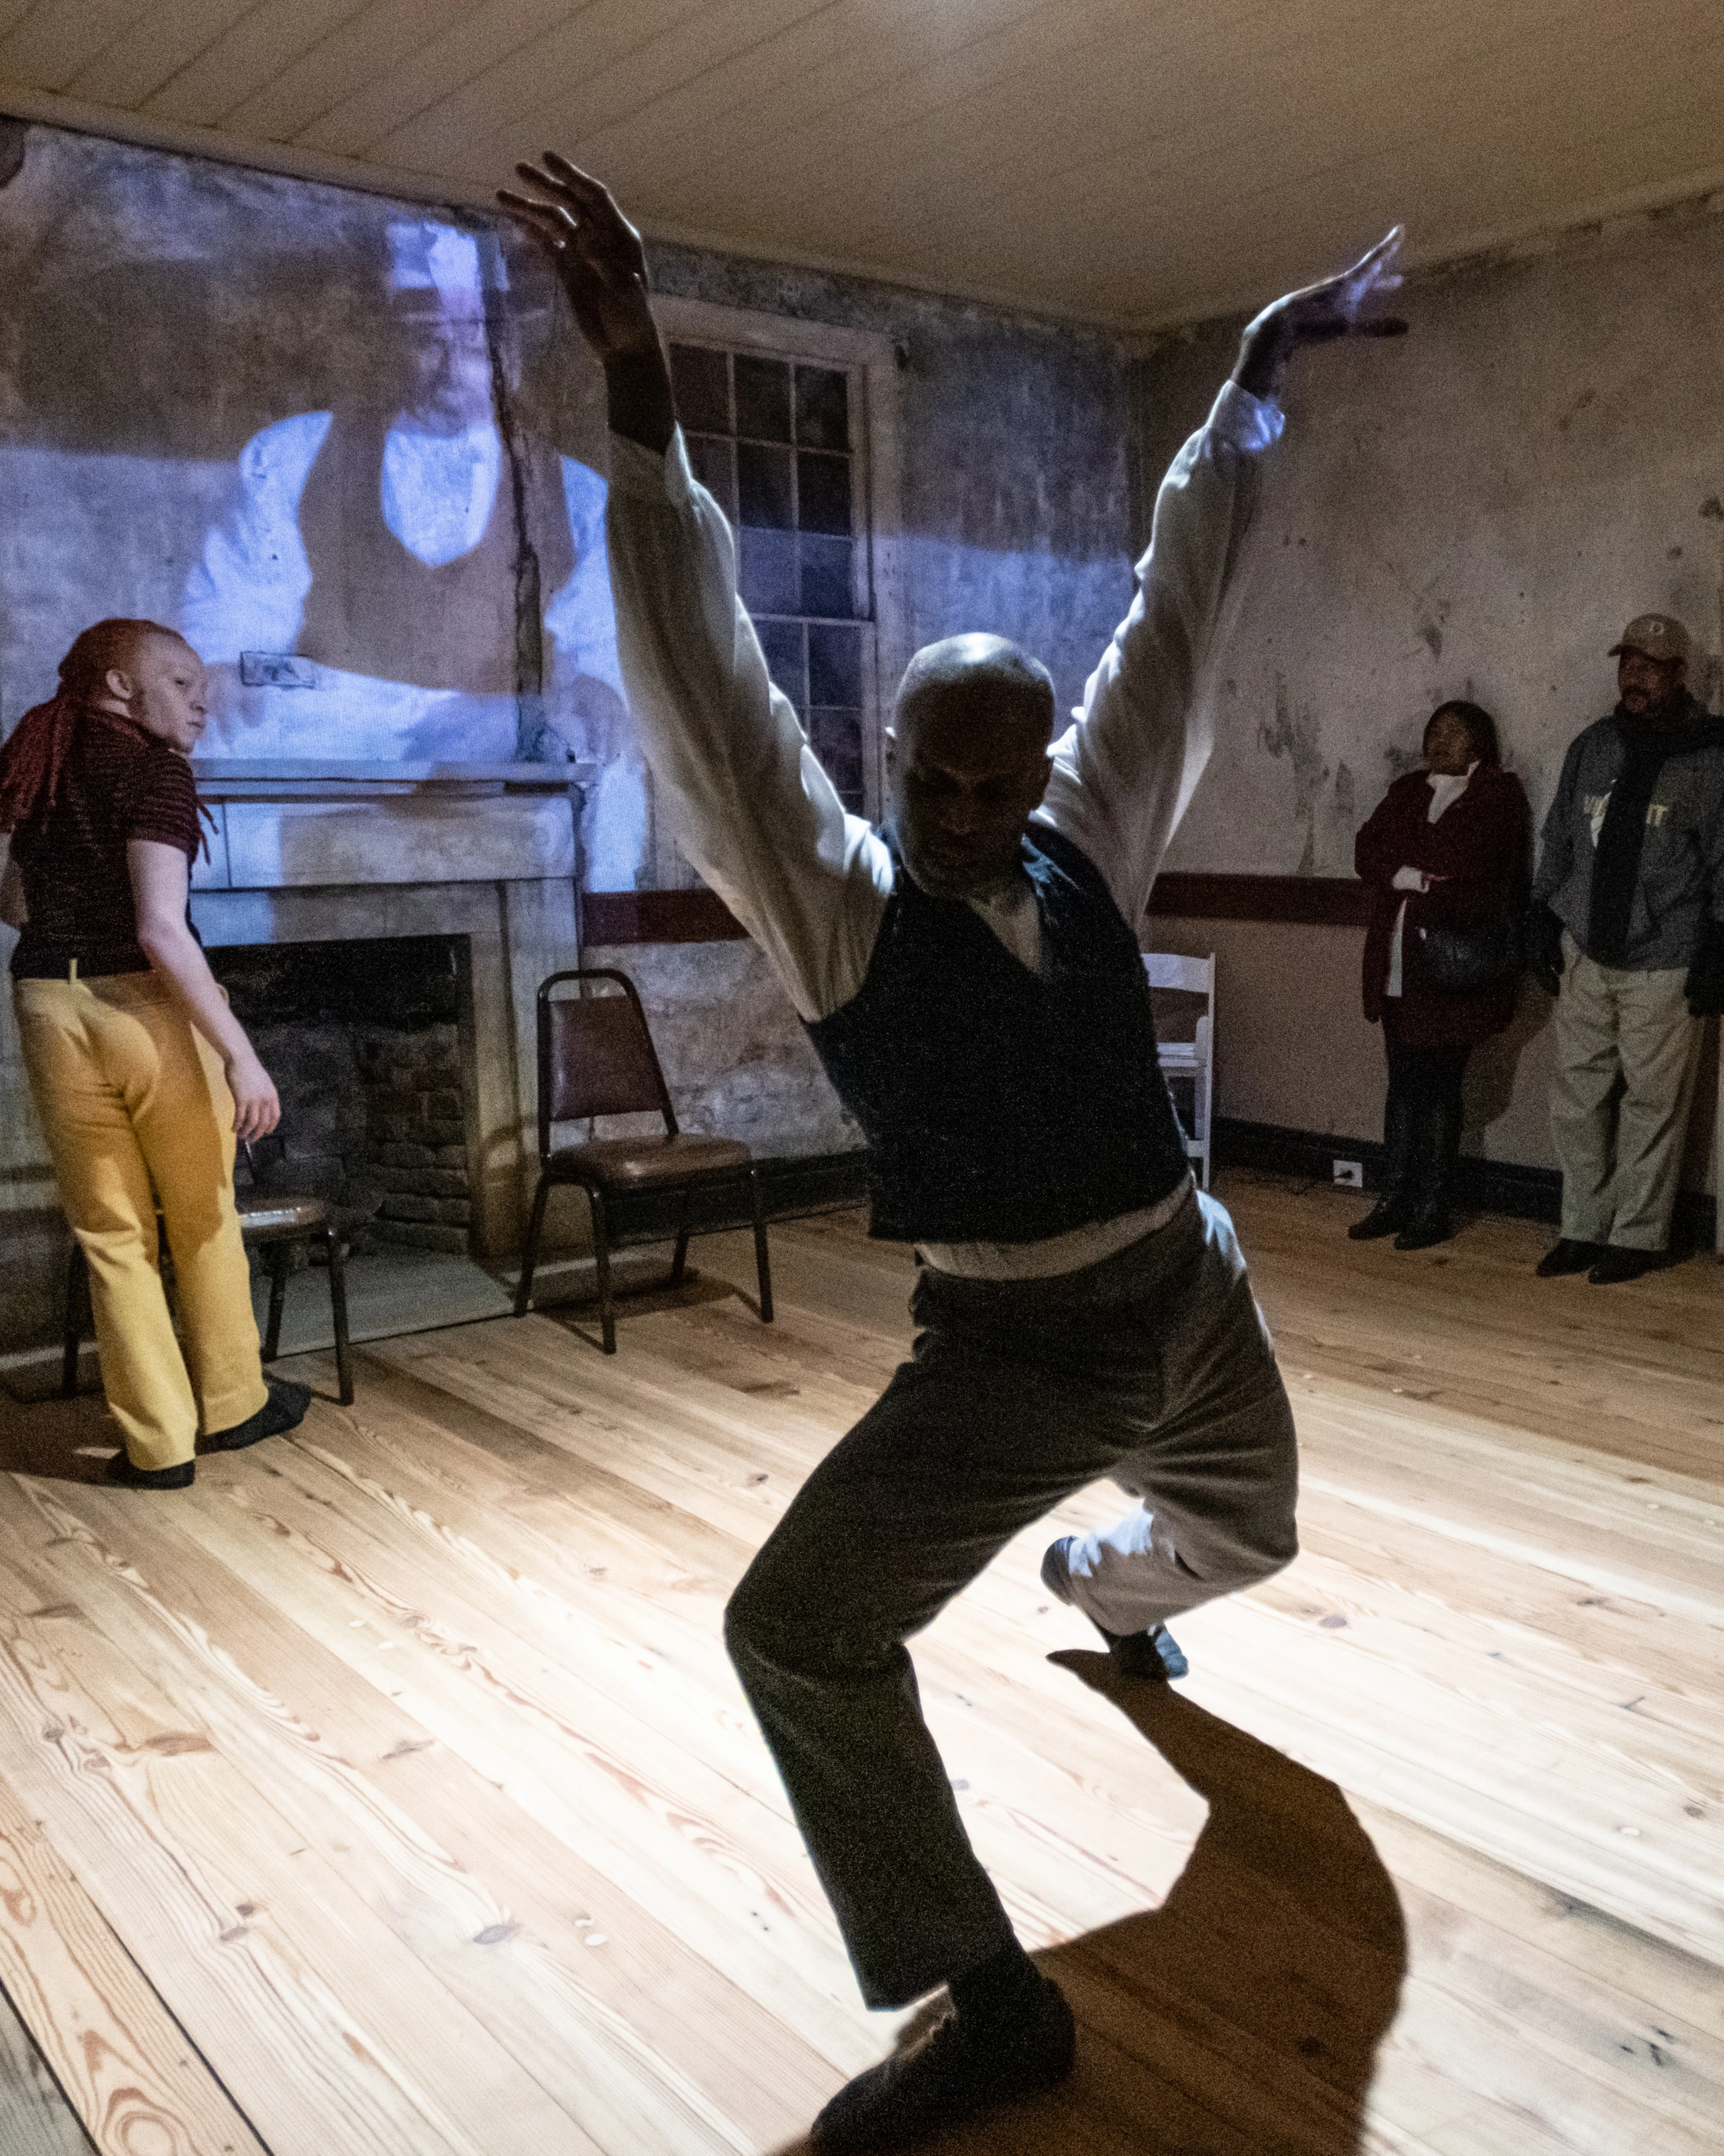  A single dancer performs in Wideman Davis Dance’s “Migratuse Ataraxia.” They are raising their arms and stepping their right foot forward. A multimedia projection is displayed behind them.